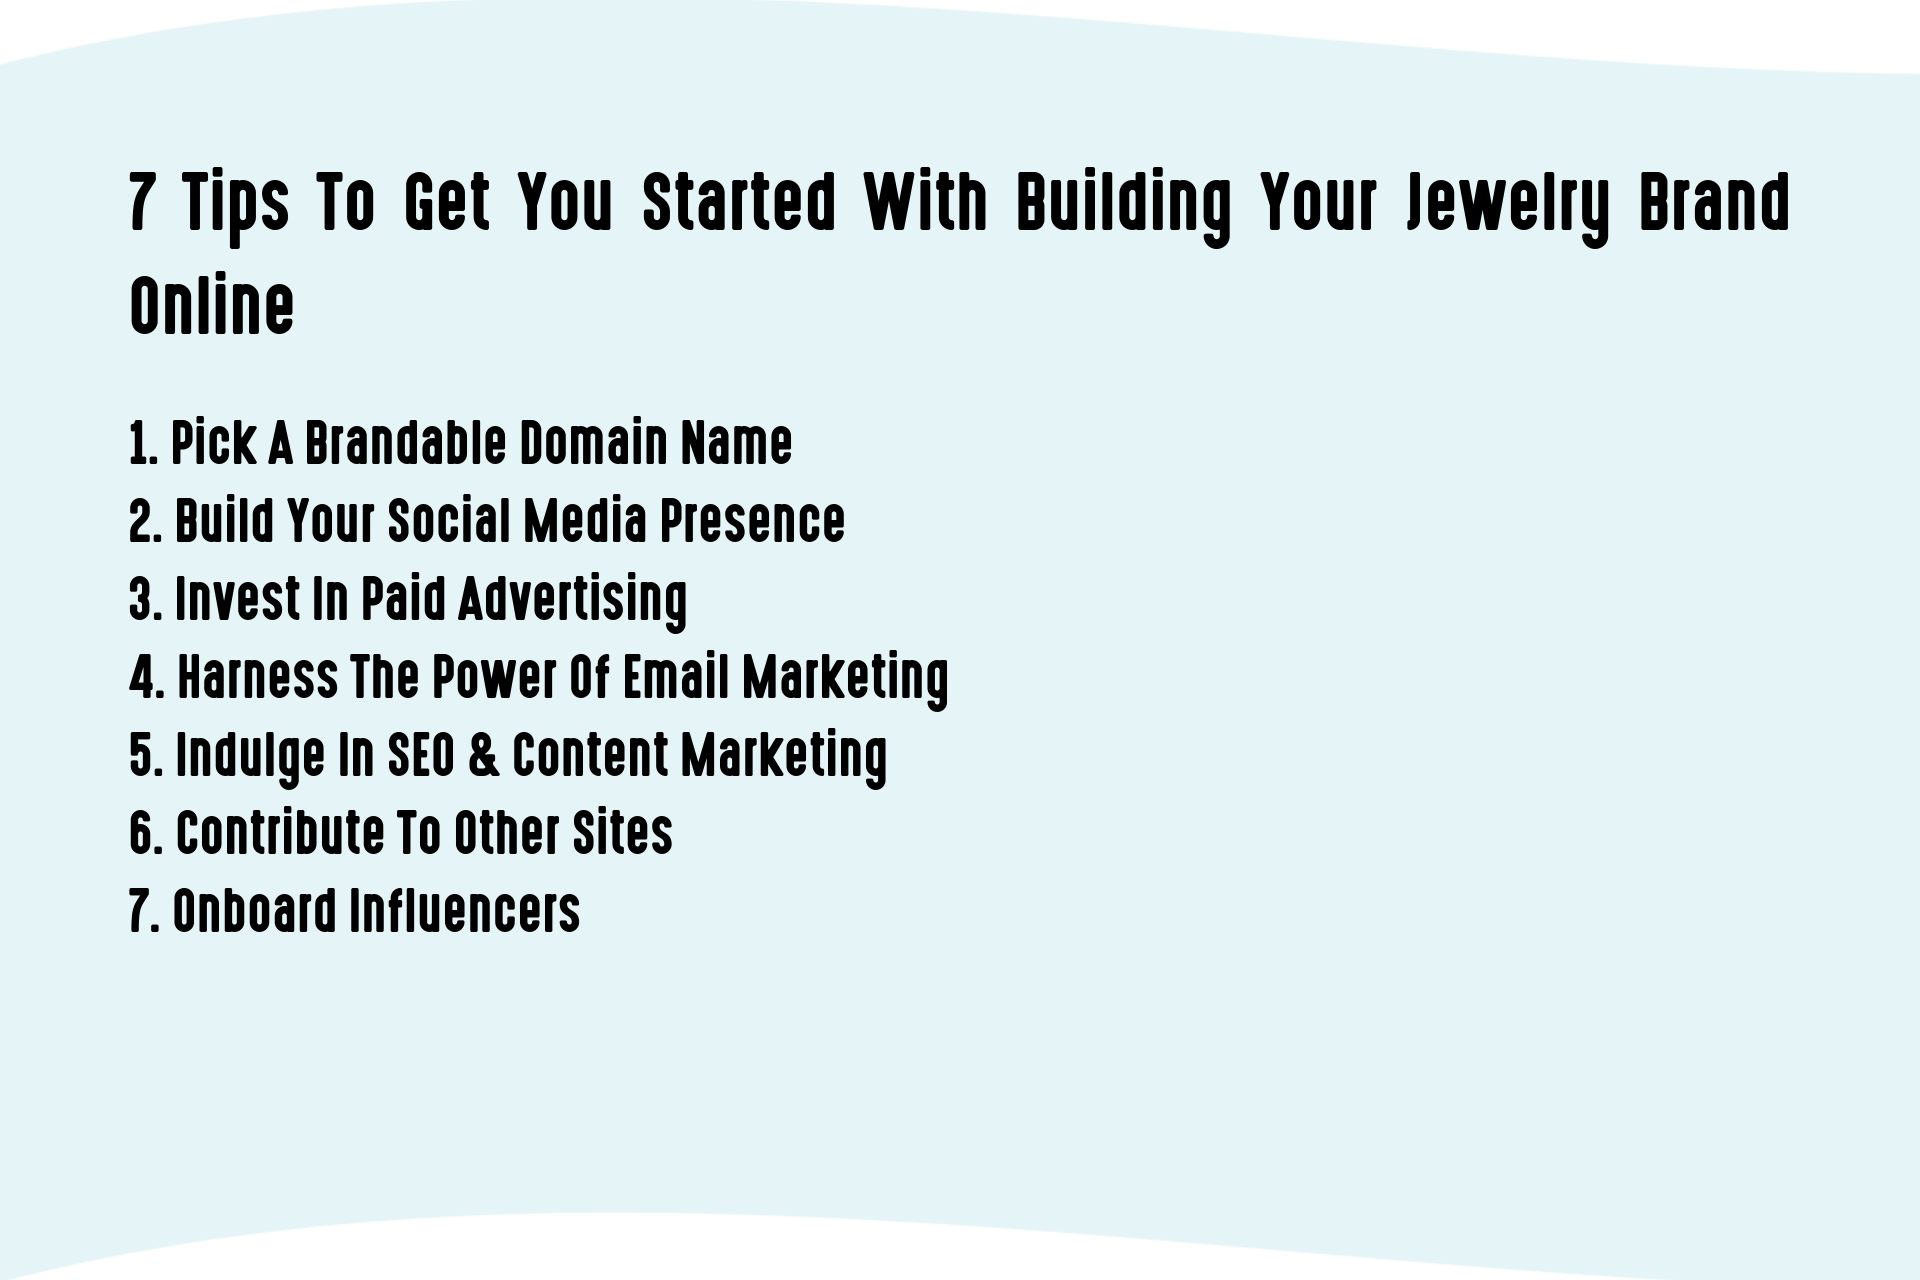 7 Tips To Get You Started With Building Your Jewelry Brand Online